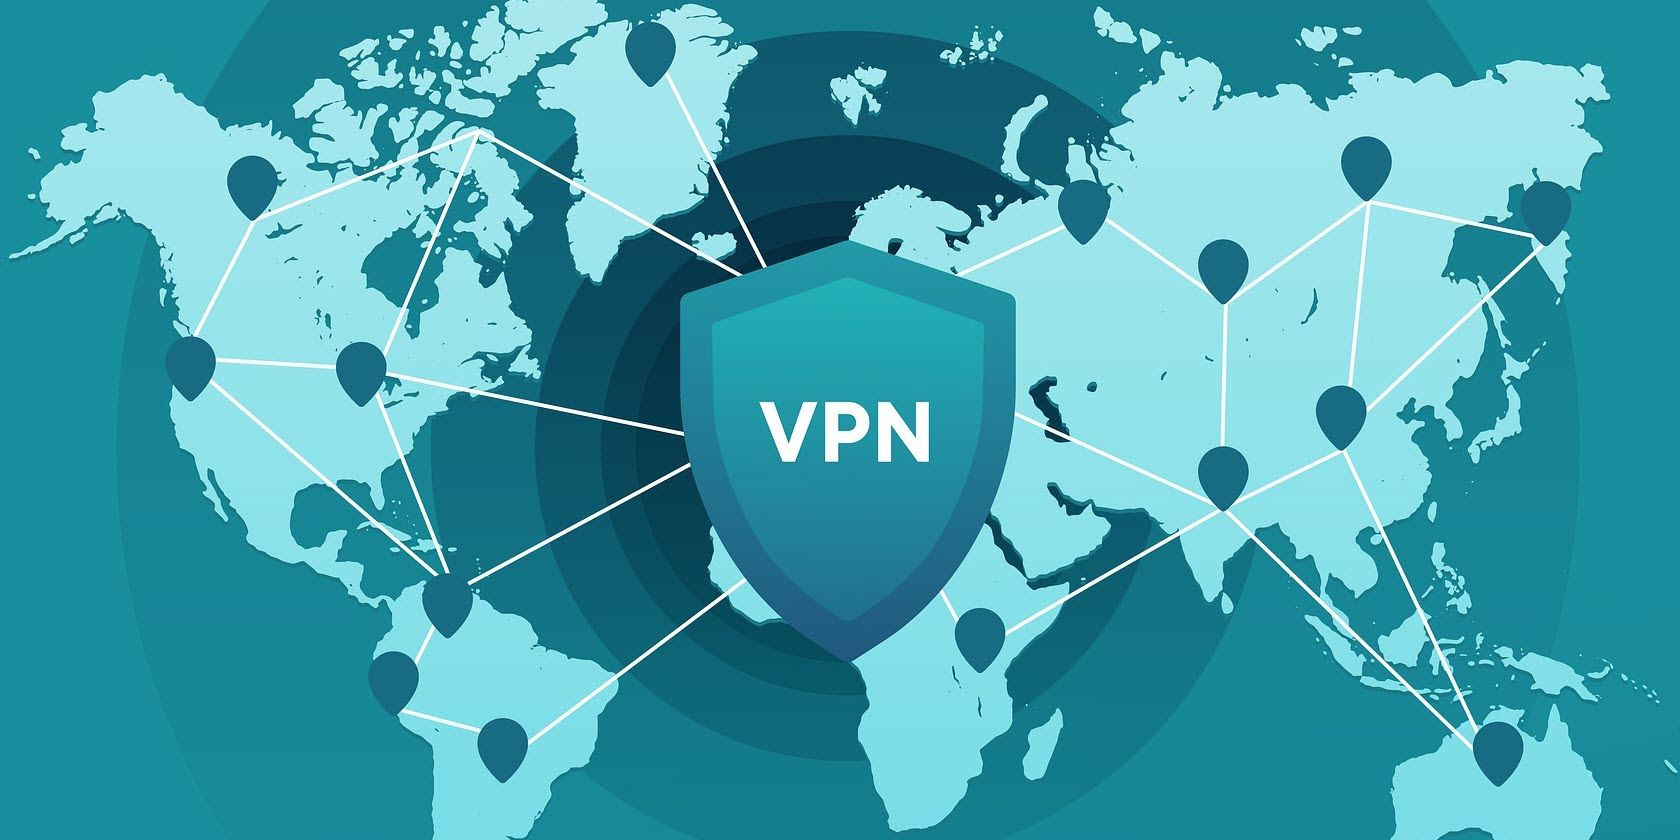 Explained: 8 Important VPN Features and How They Work